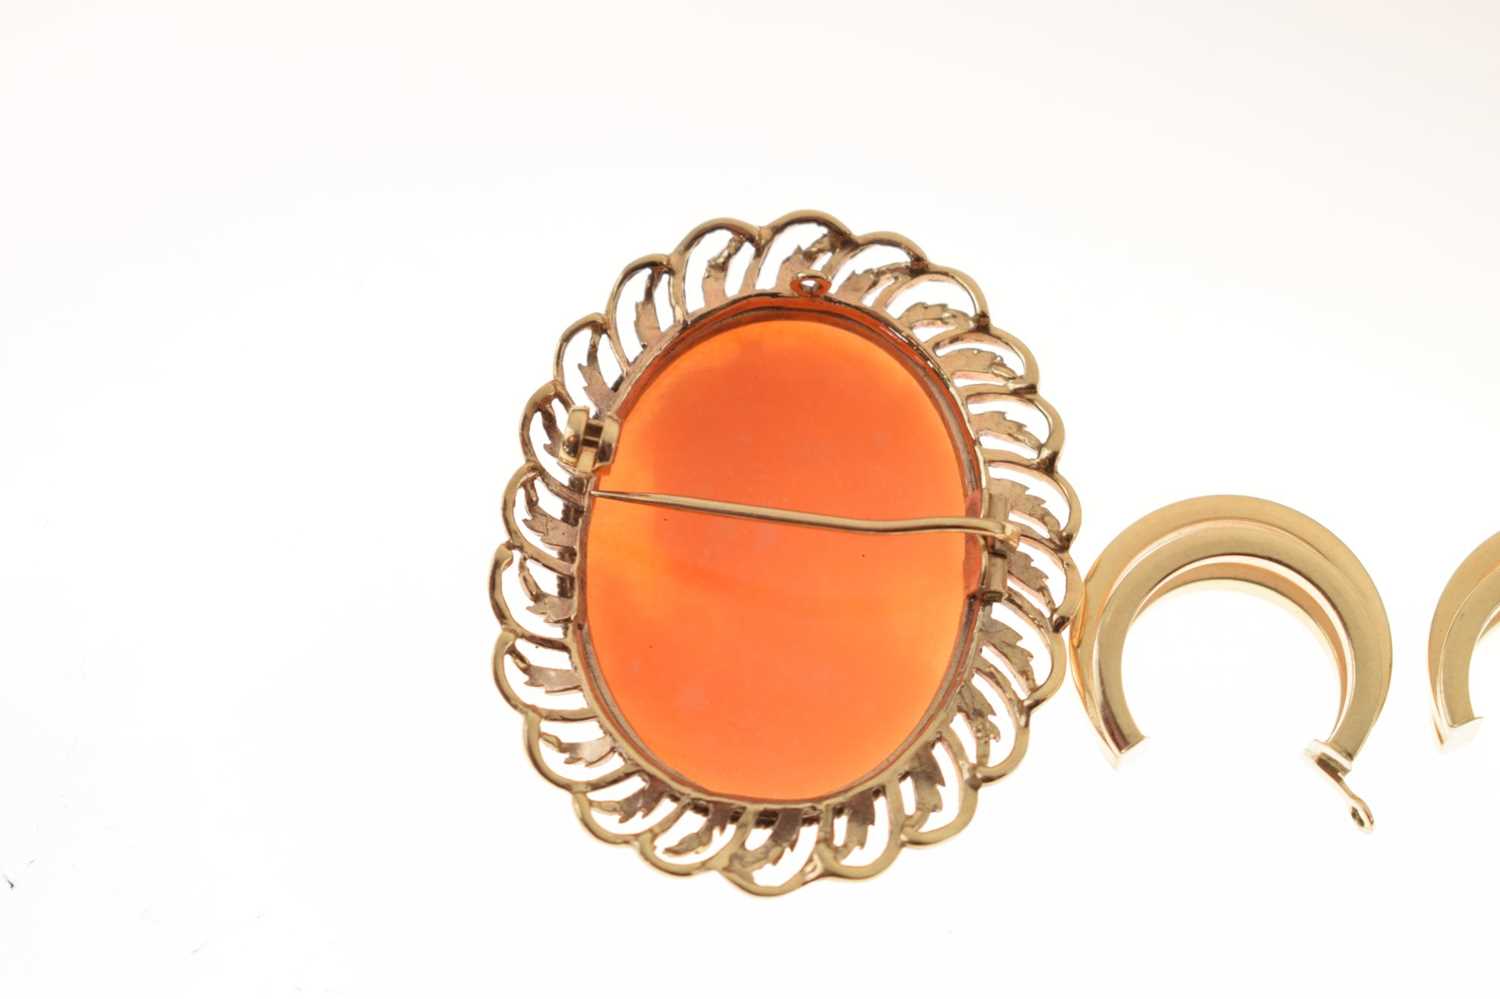 9ct gold cameo brooch and sundry gold jewellery - Image 4 of 8